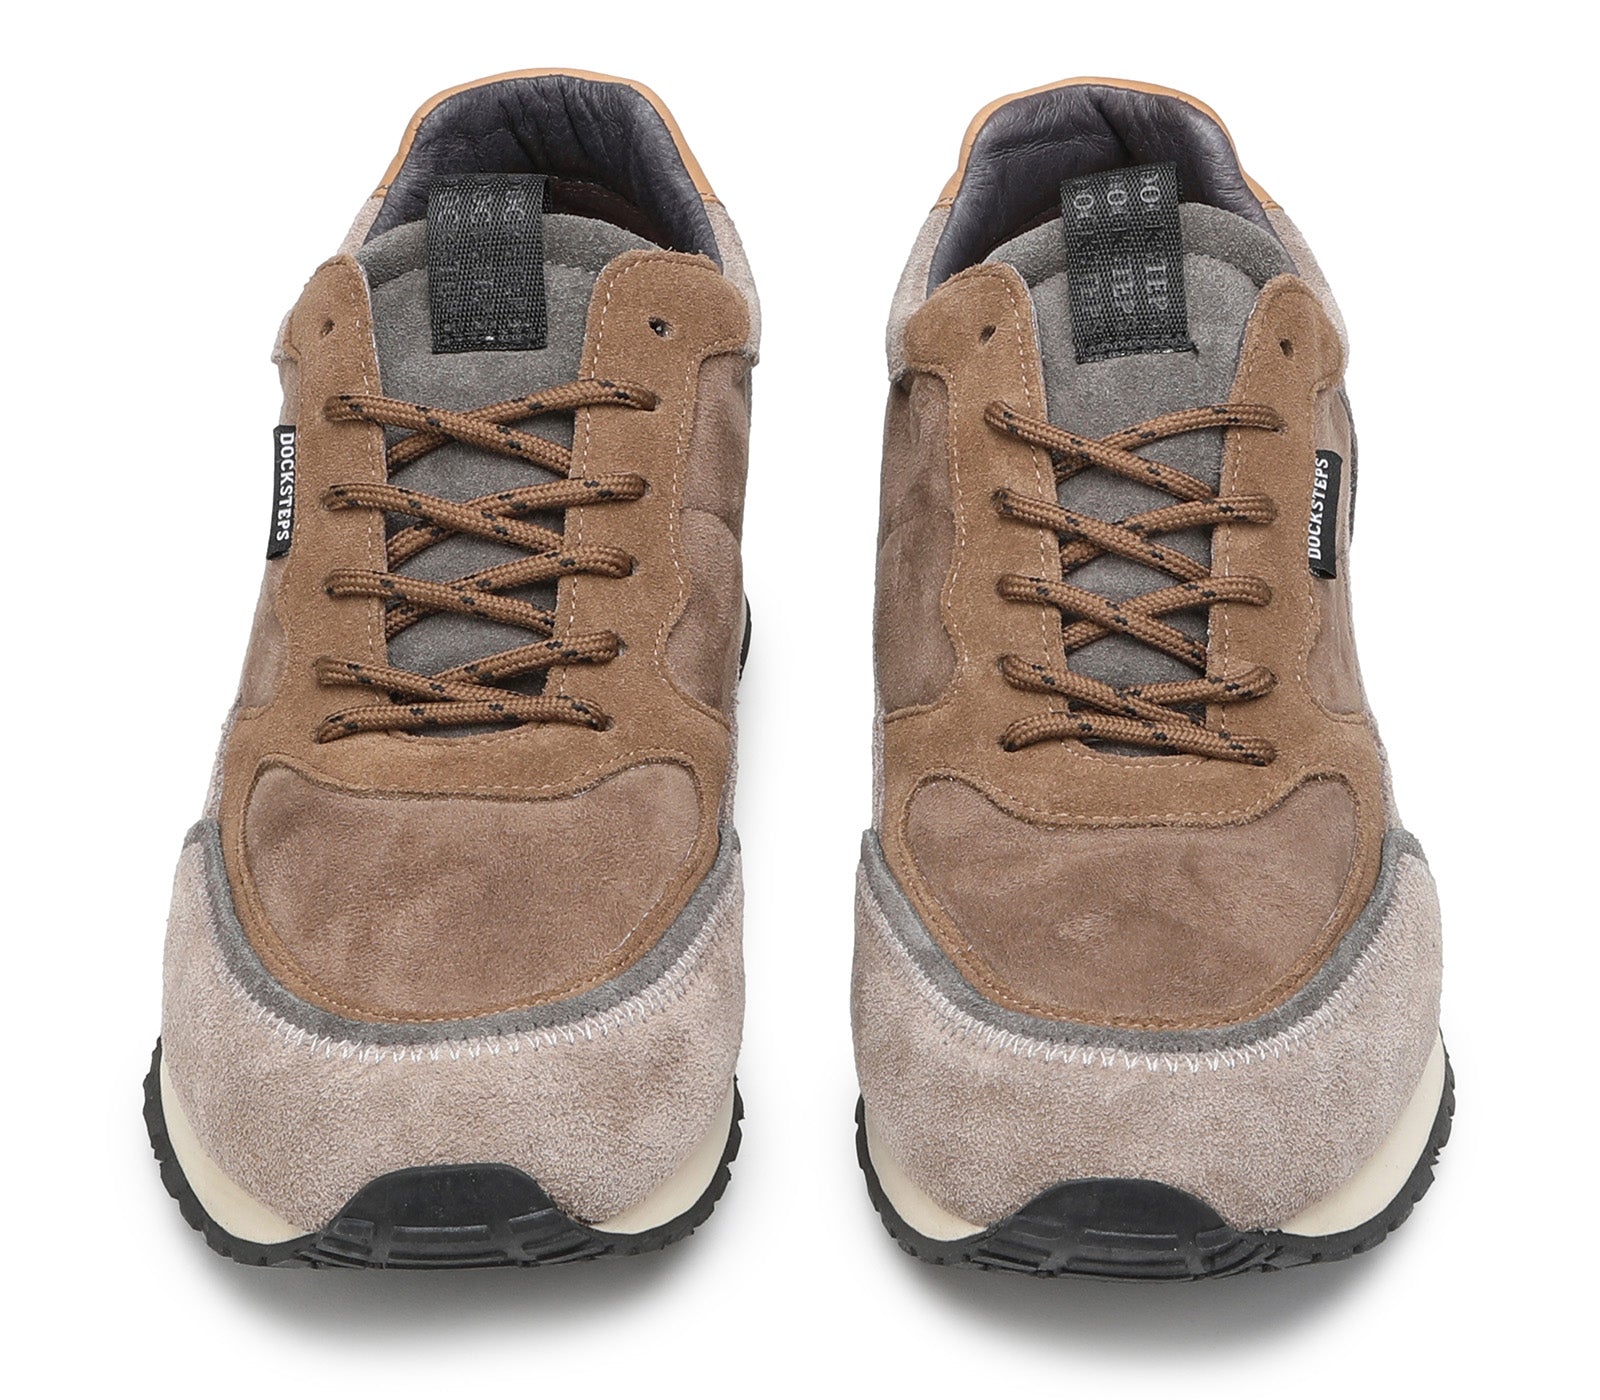 Men's Sneakers in Mixed Suede Leather Tobacco Color